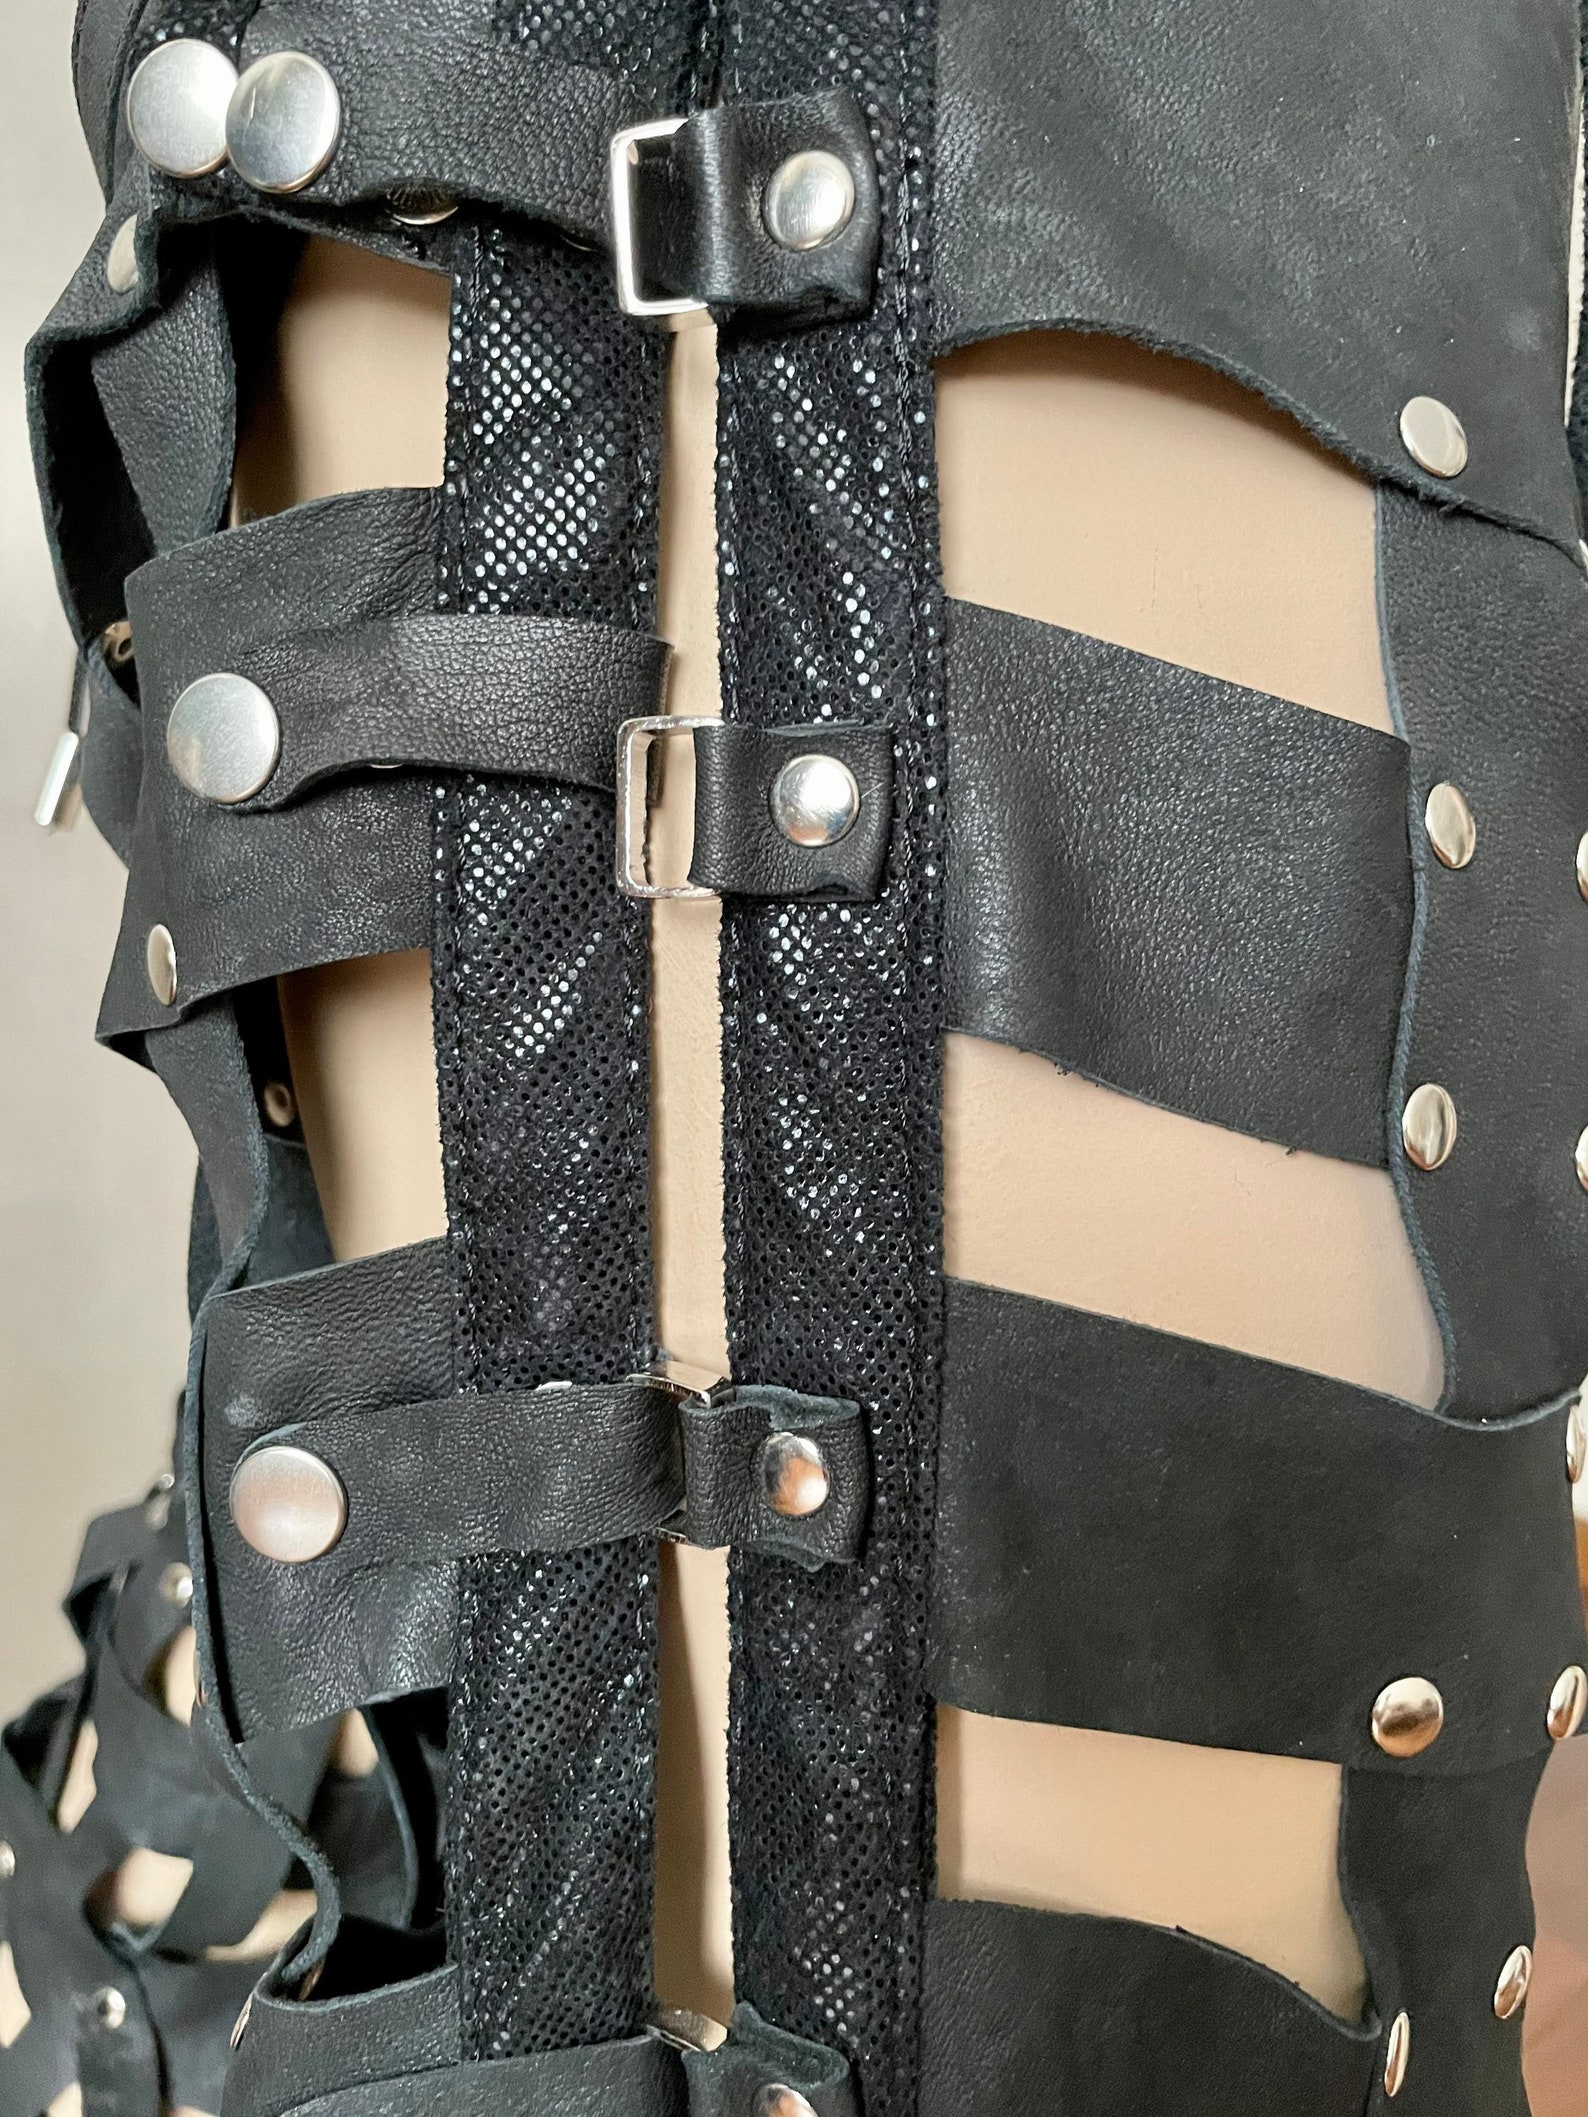 Mens Leather Chaps/ Back Lacing/ Backless Pants/ BDSM Leather | Etsy